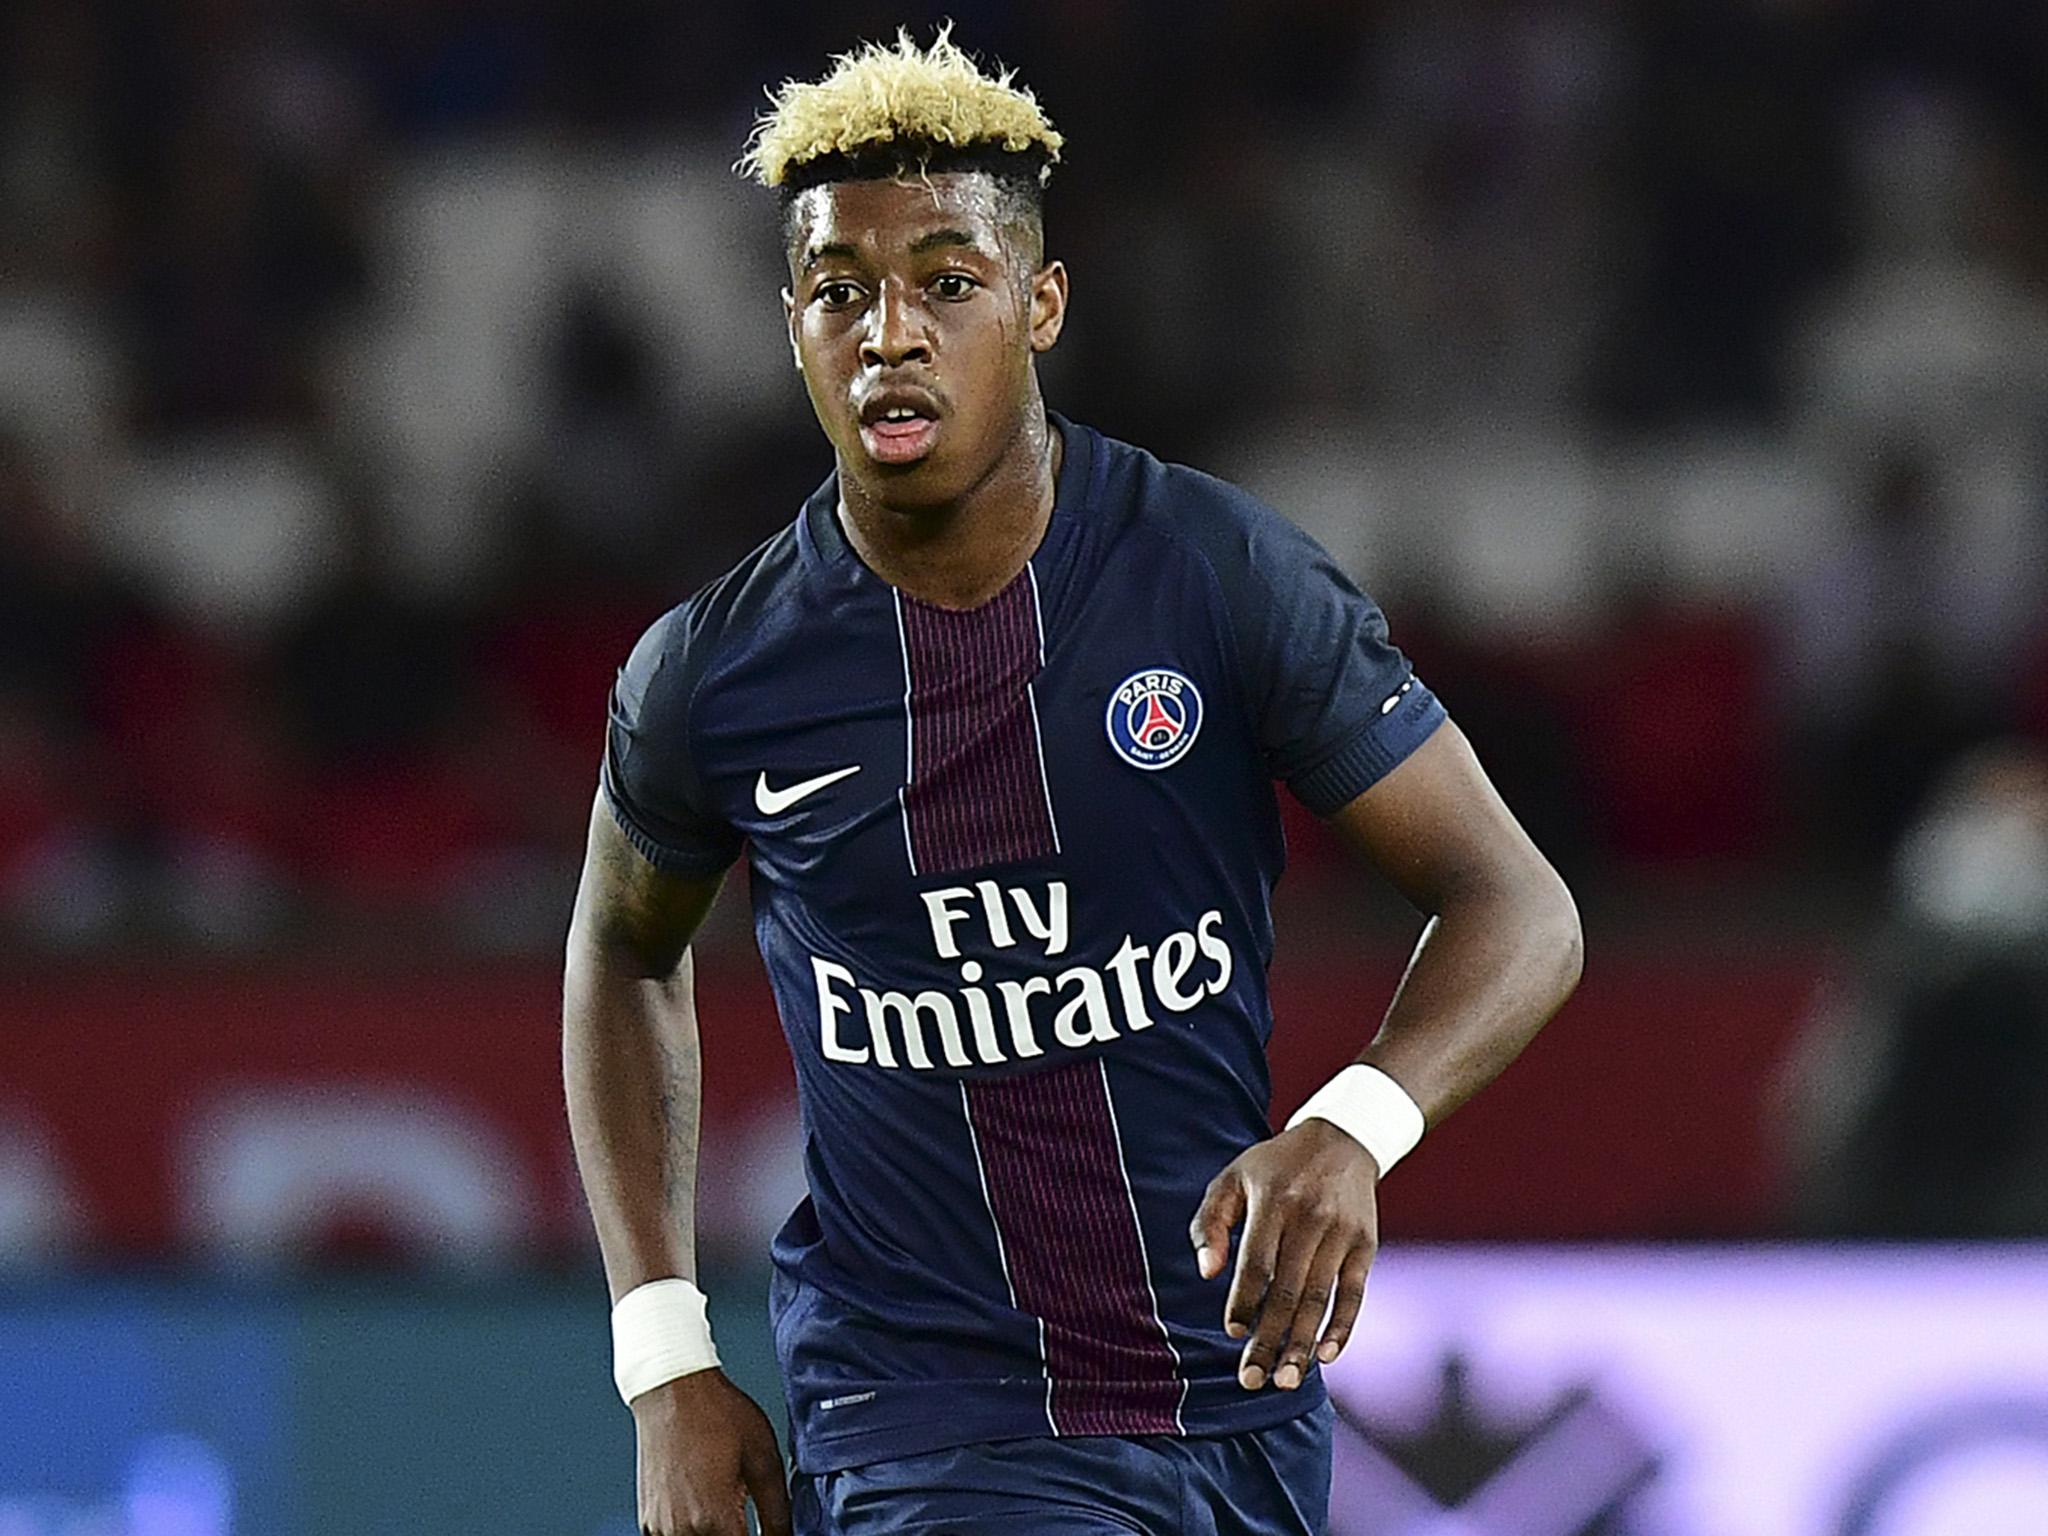 The 21-year-old started at centre-back for PSG